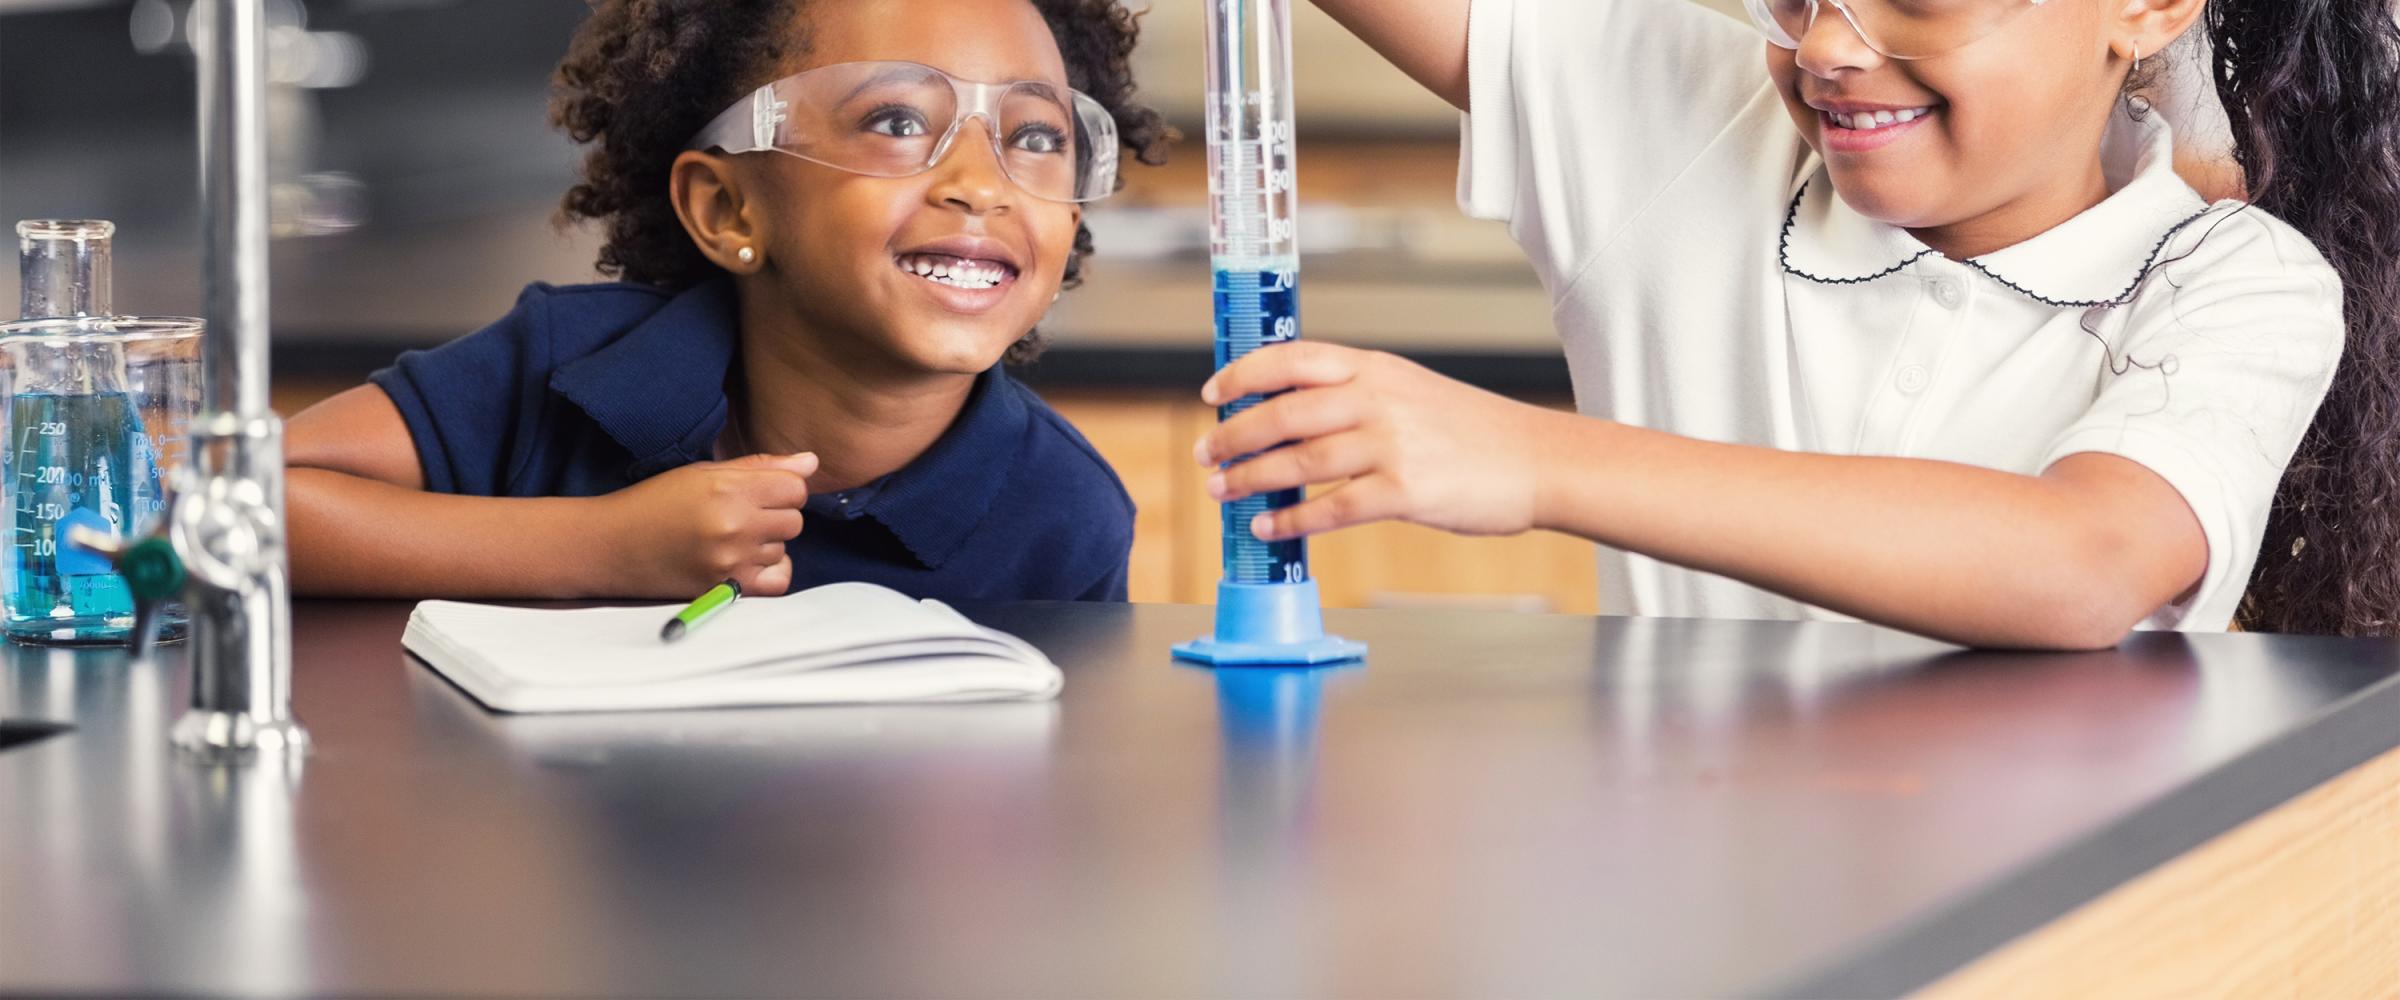 Two students work on a science experiment in the classroom. Credit: iStock